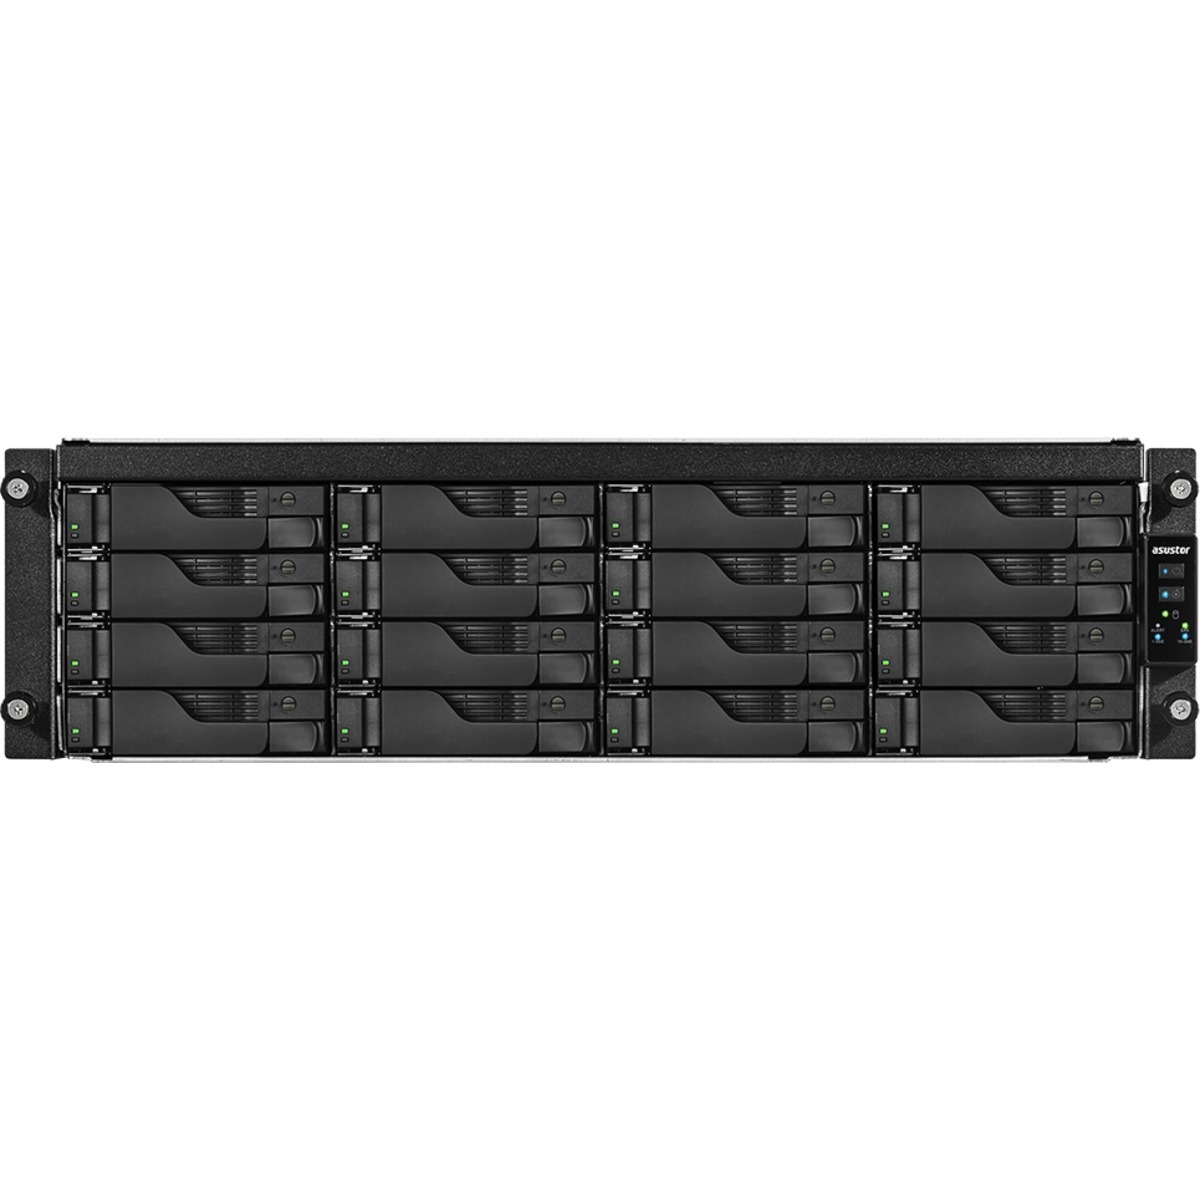 ASUSTOR AS7116RDX NAS - Network Attached Storage Device Burn-In Tested Configurations